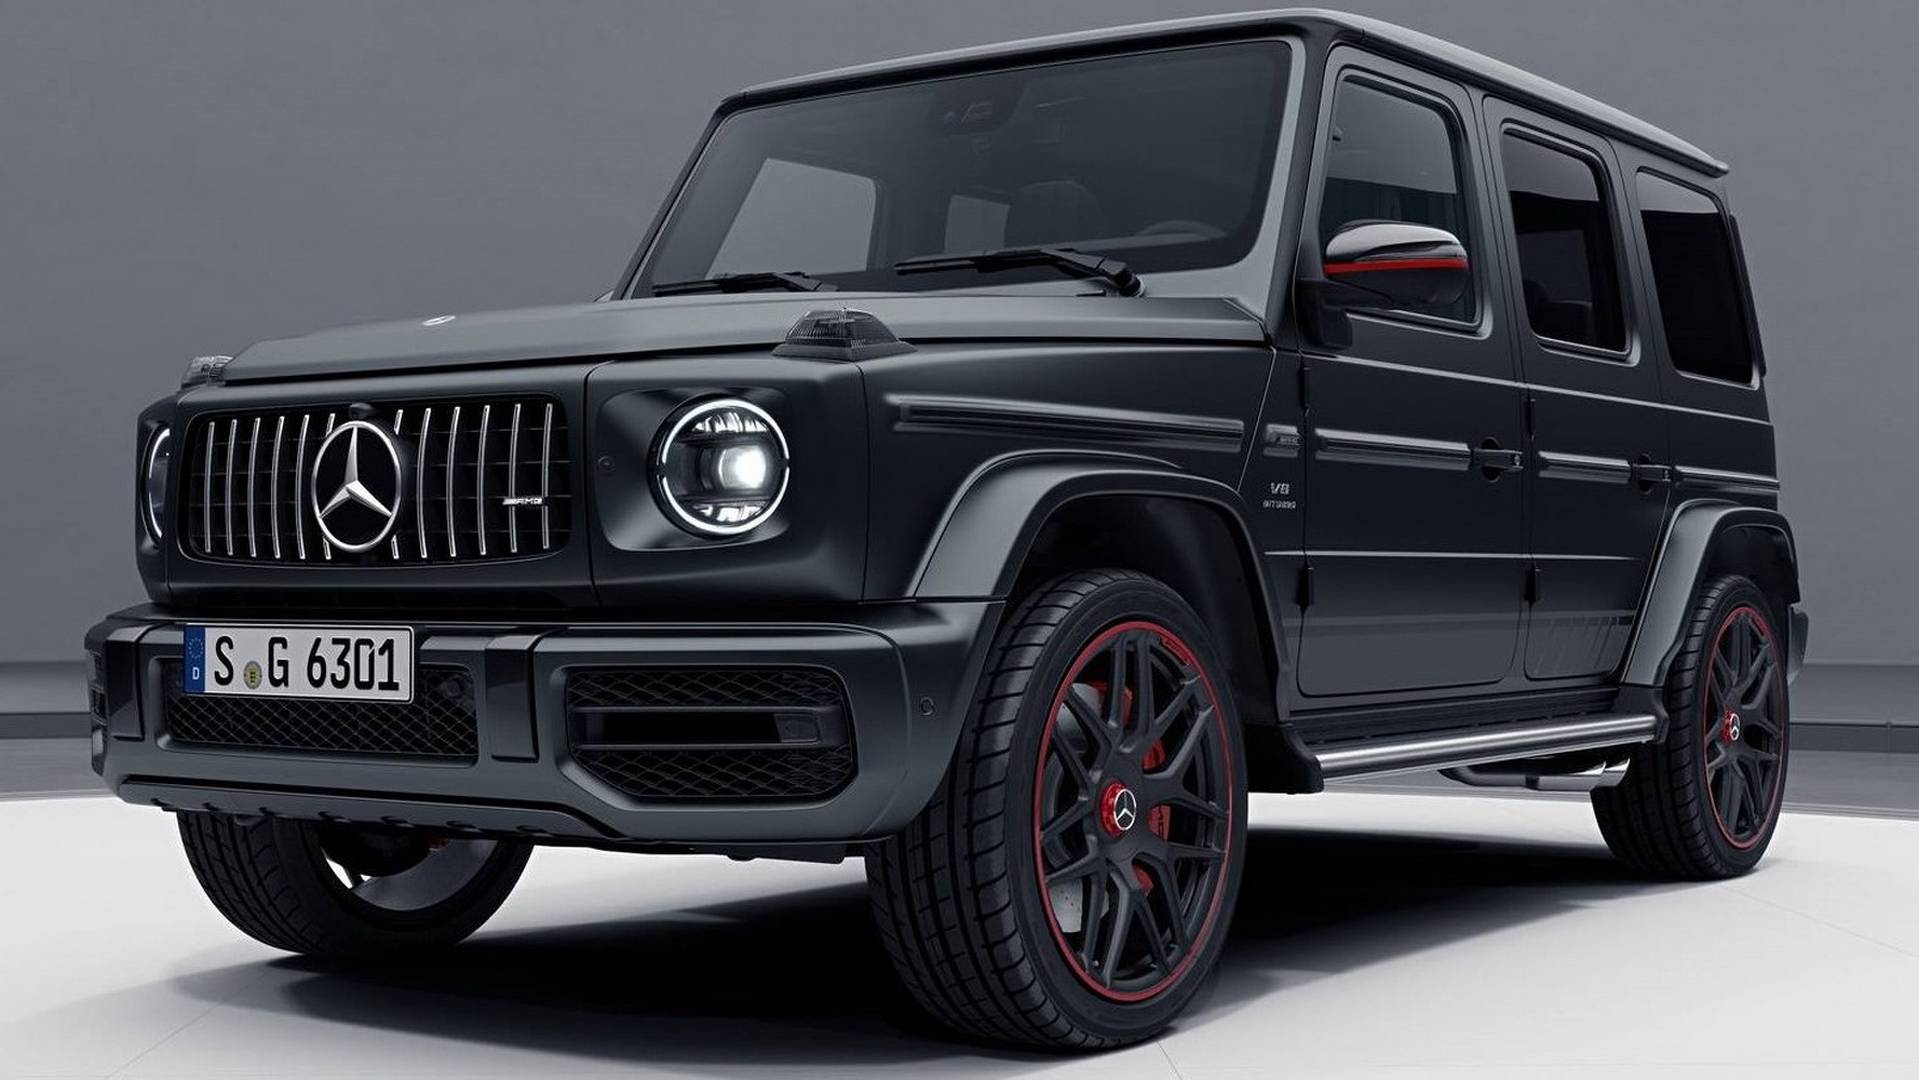 Ắc quy cho xe Mercedes G63 AMG